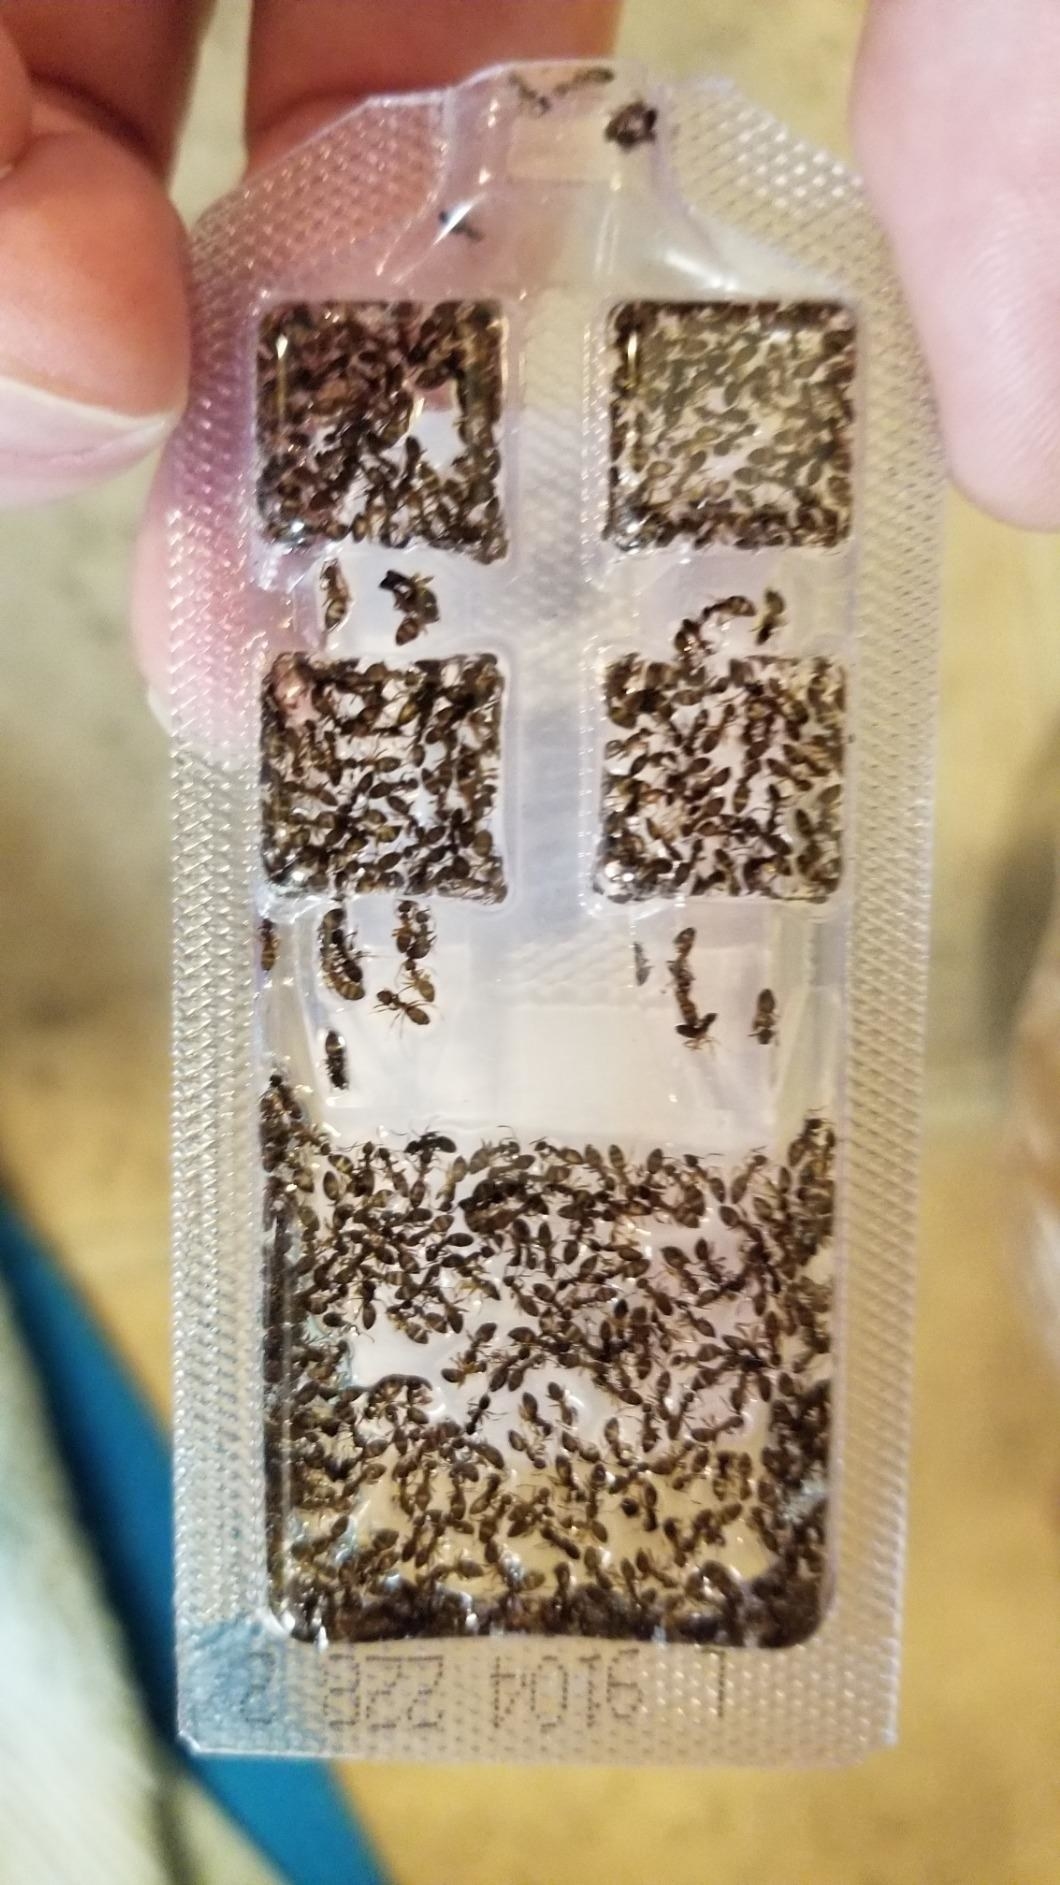 A bait trap filled with ants